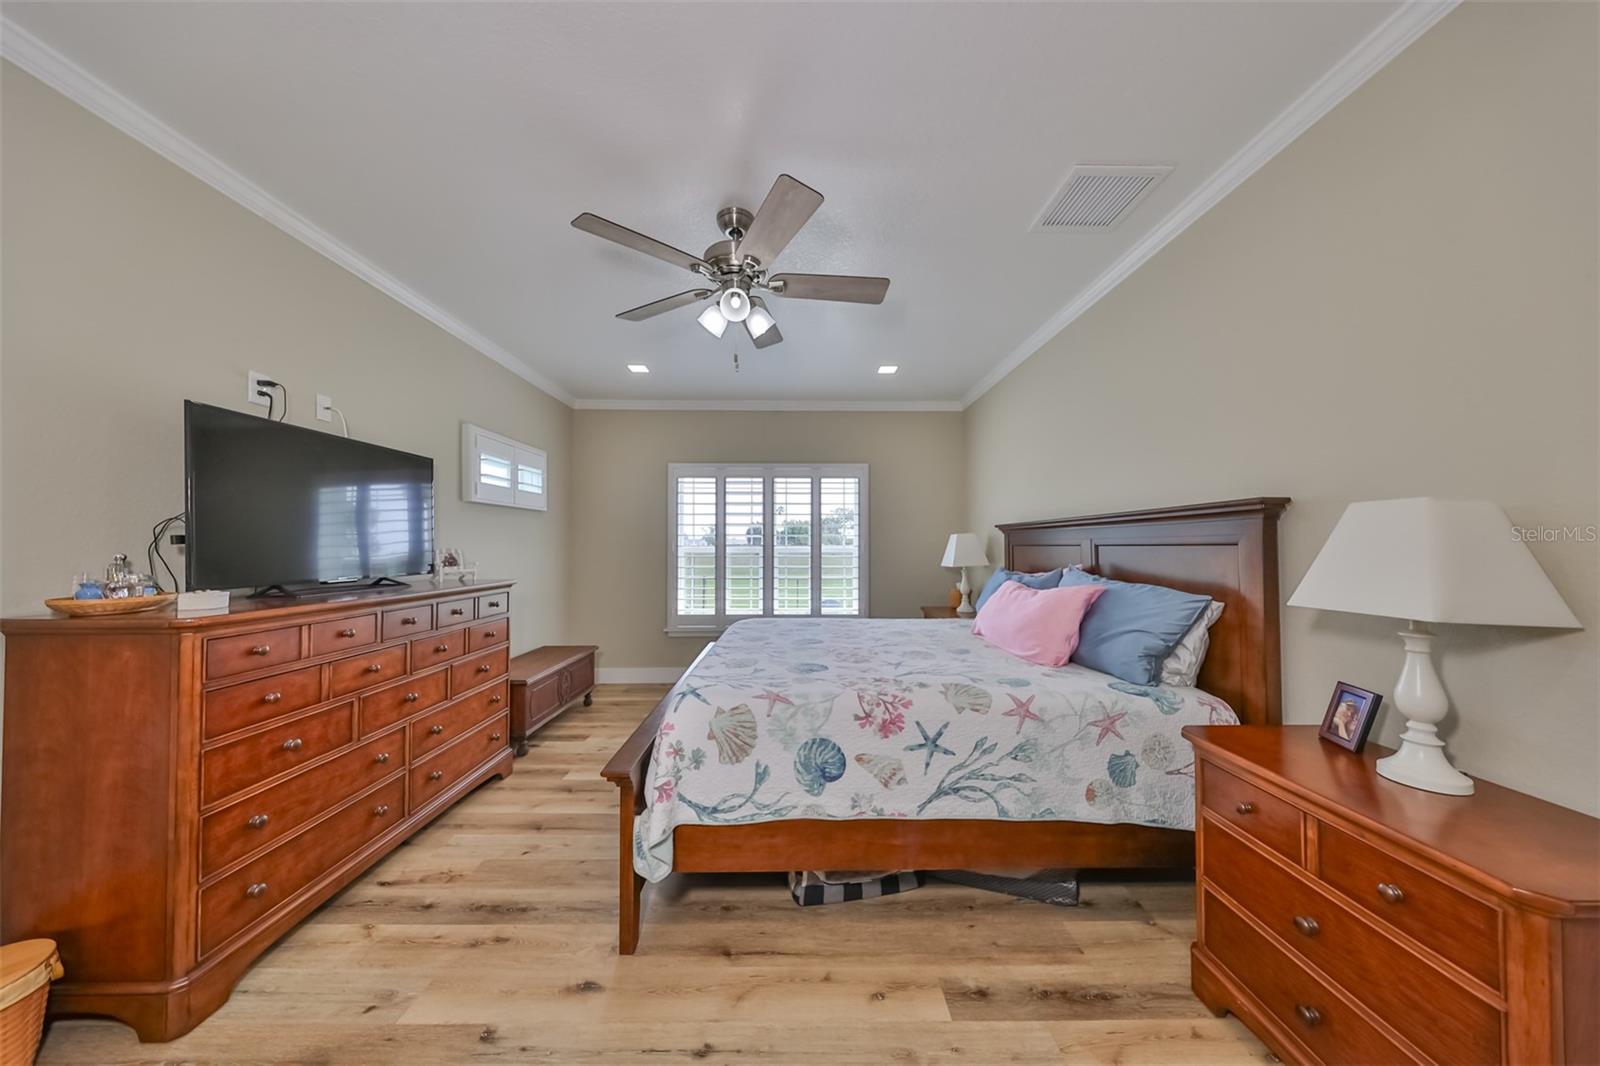 Primary bedroom with crown molding, plantation shutters and beautiful flooring.